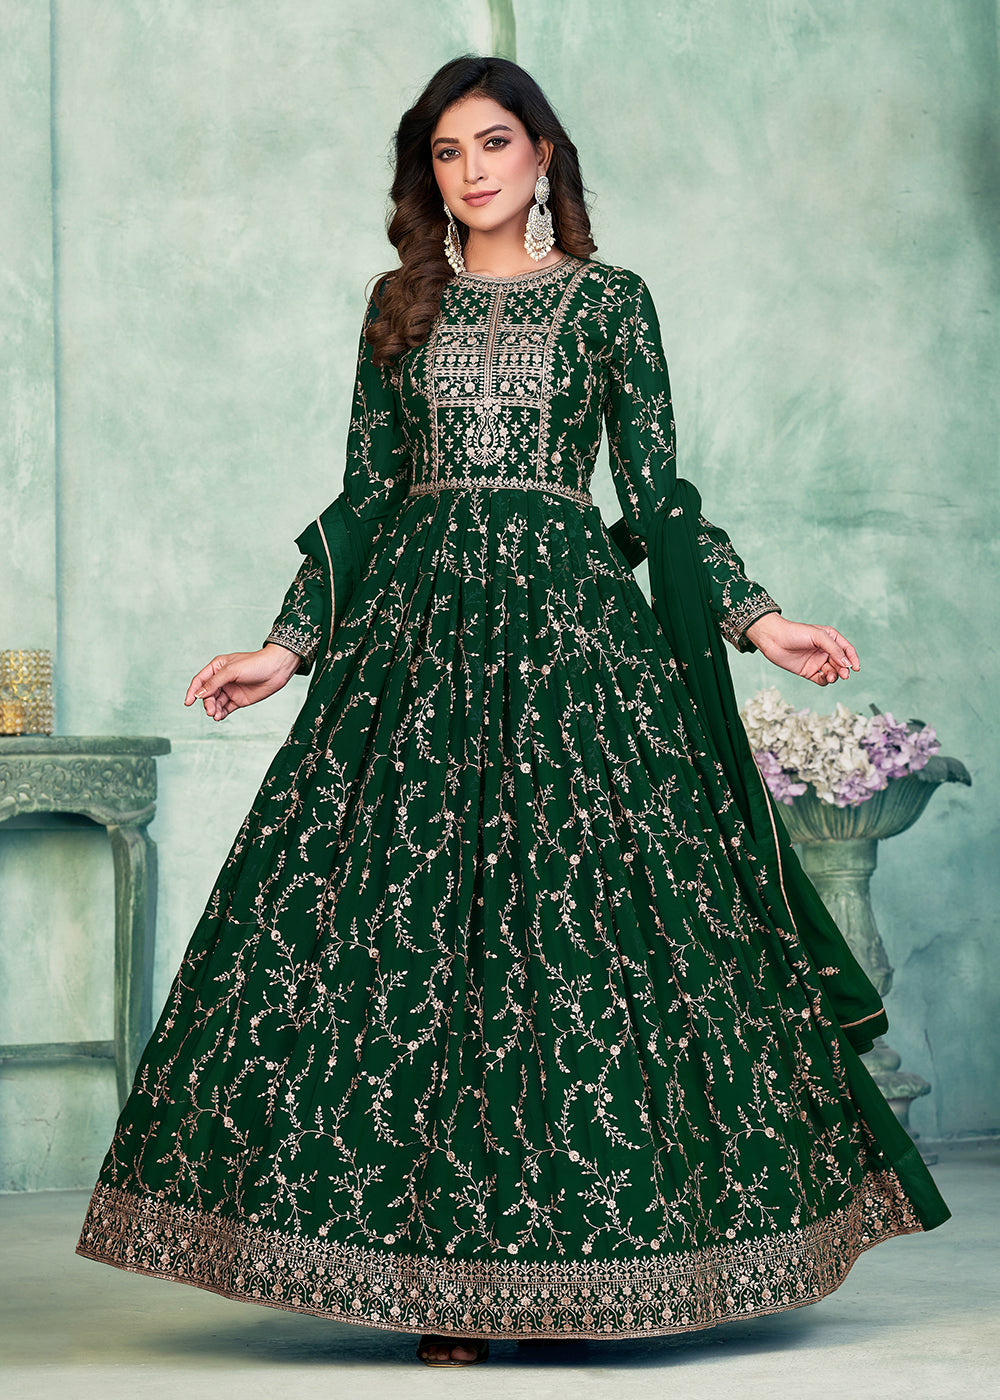 Buy Now Designer Green Embroidered Wedding Party Anarkali Suit Online in USA, UK, Australia, New Zealand, Canada & Worldwide at Empress Clothing. 